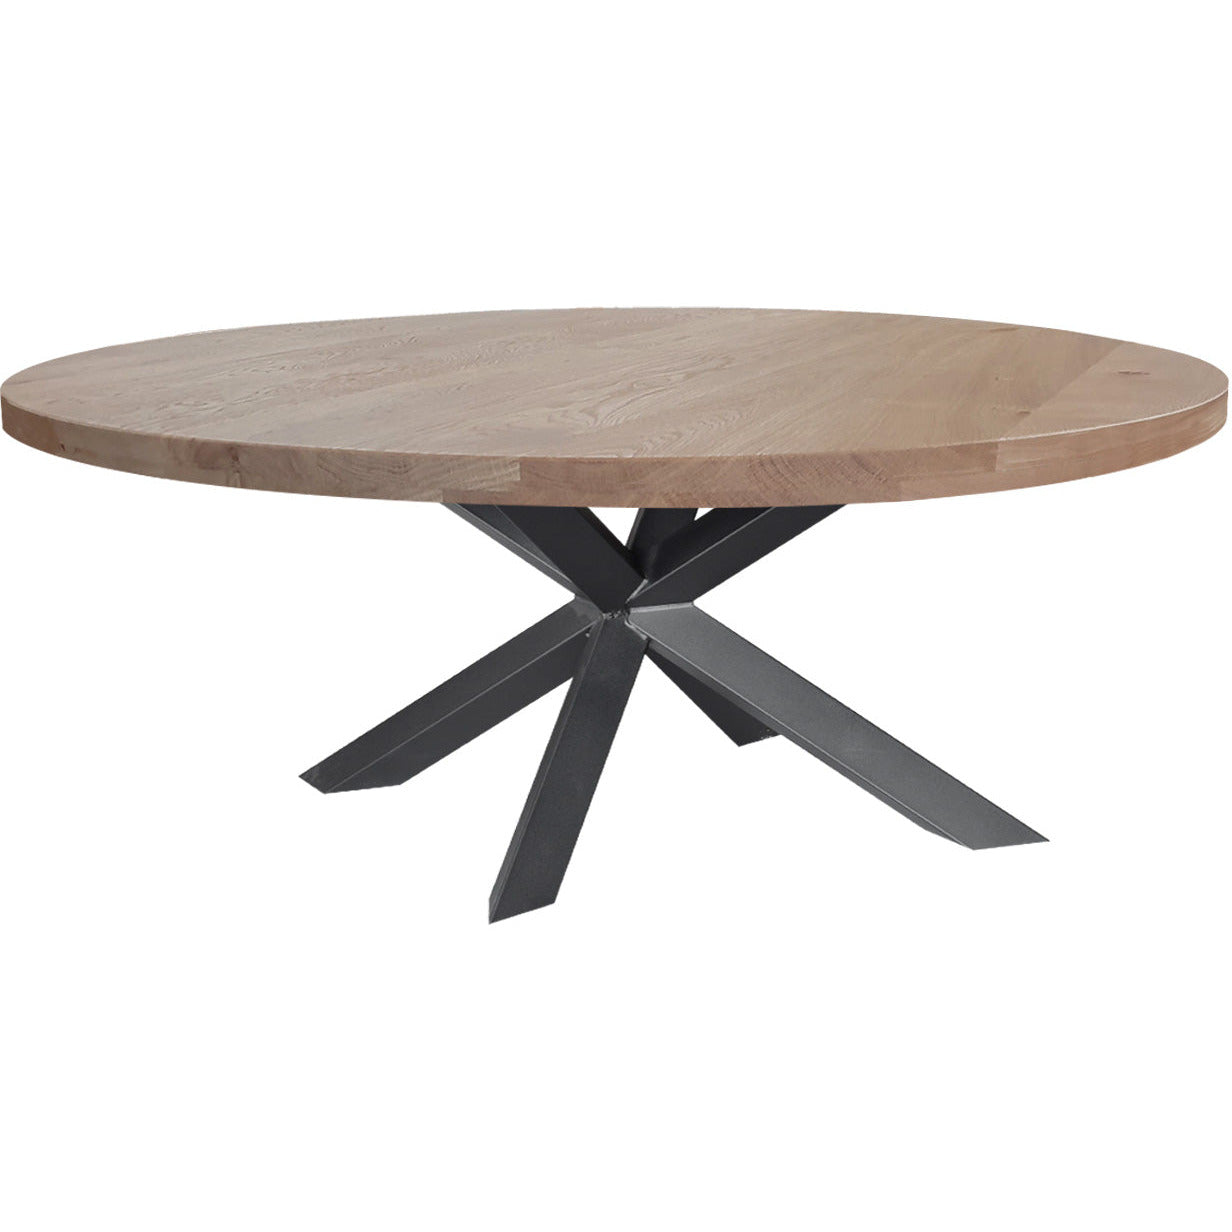 Dining table | Oval | Natural | Oak wood | Lacquered | Spiderpaw